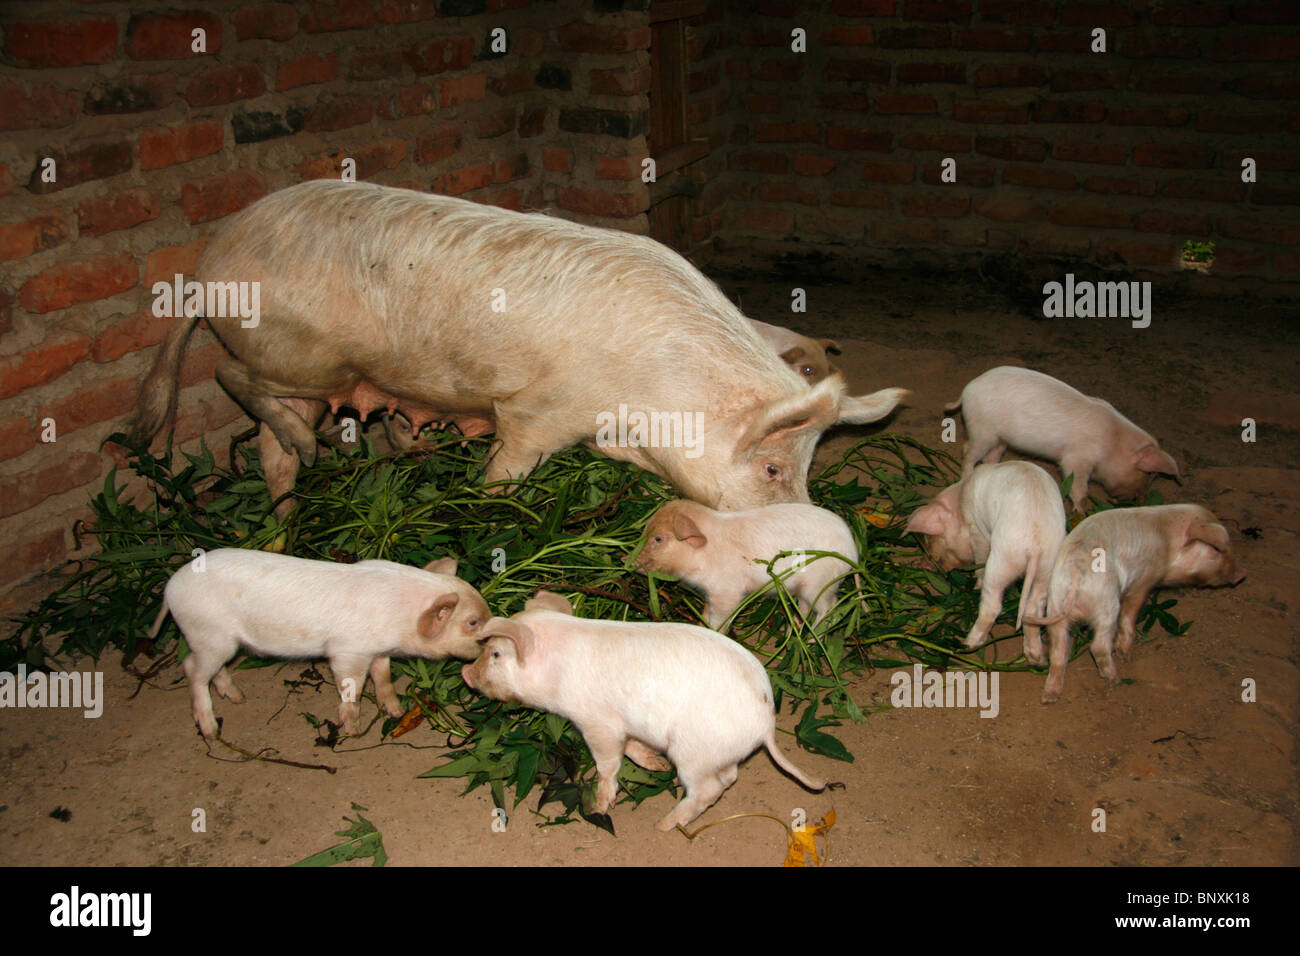 A sow with her piglets feeding in a pigsty in a rural intensive zero grazing farming environment in Uganda Stock Photo